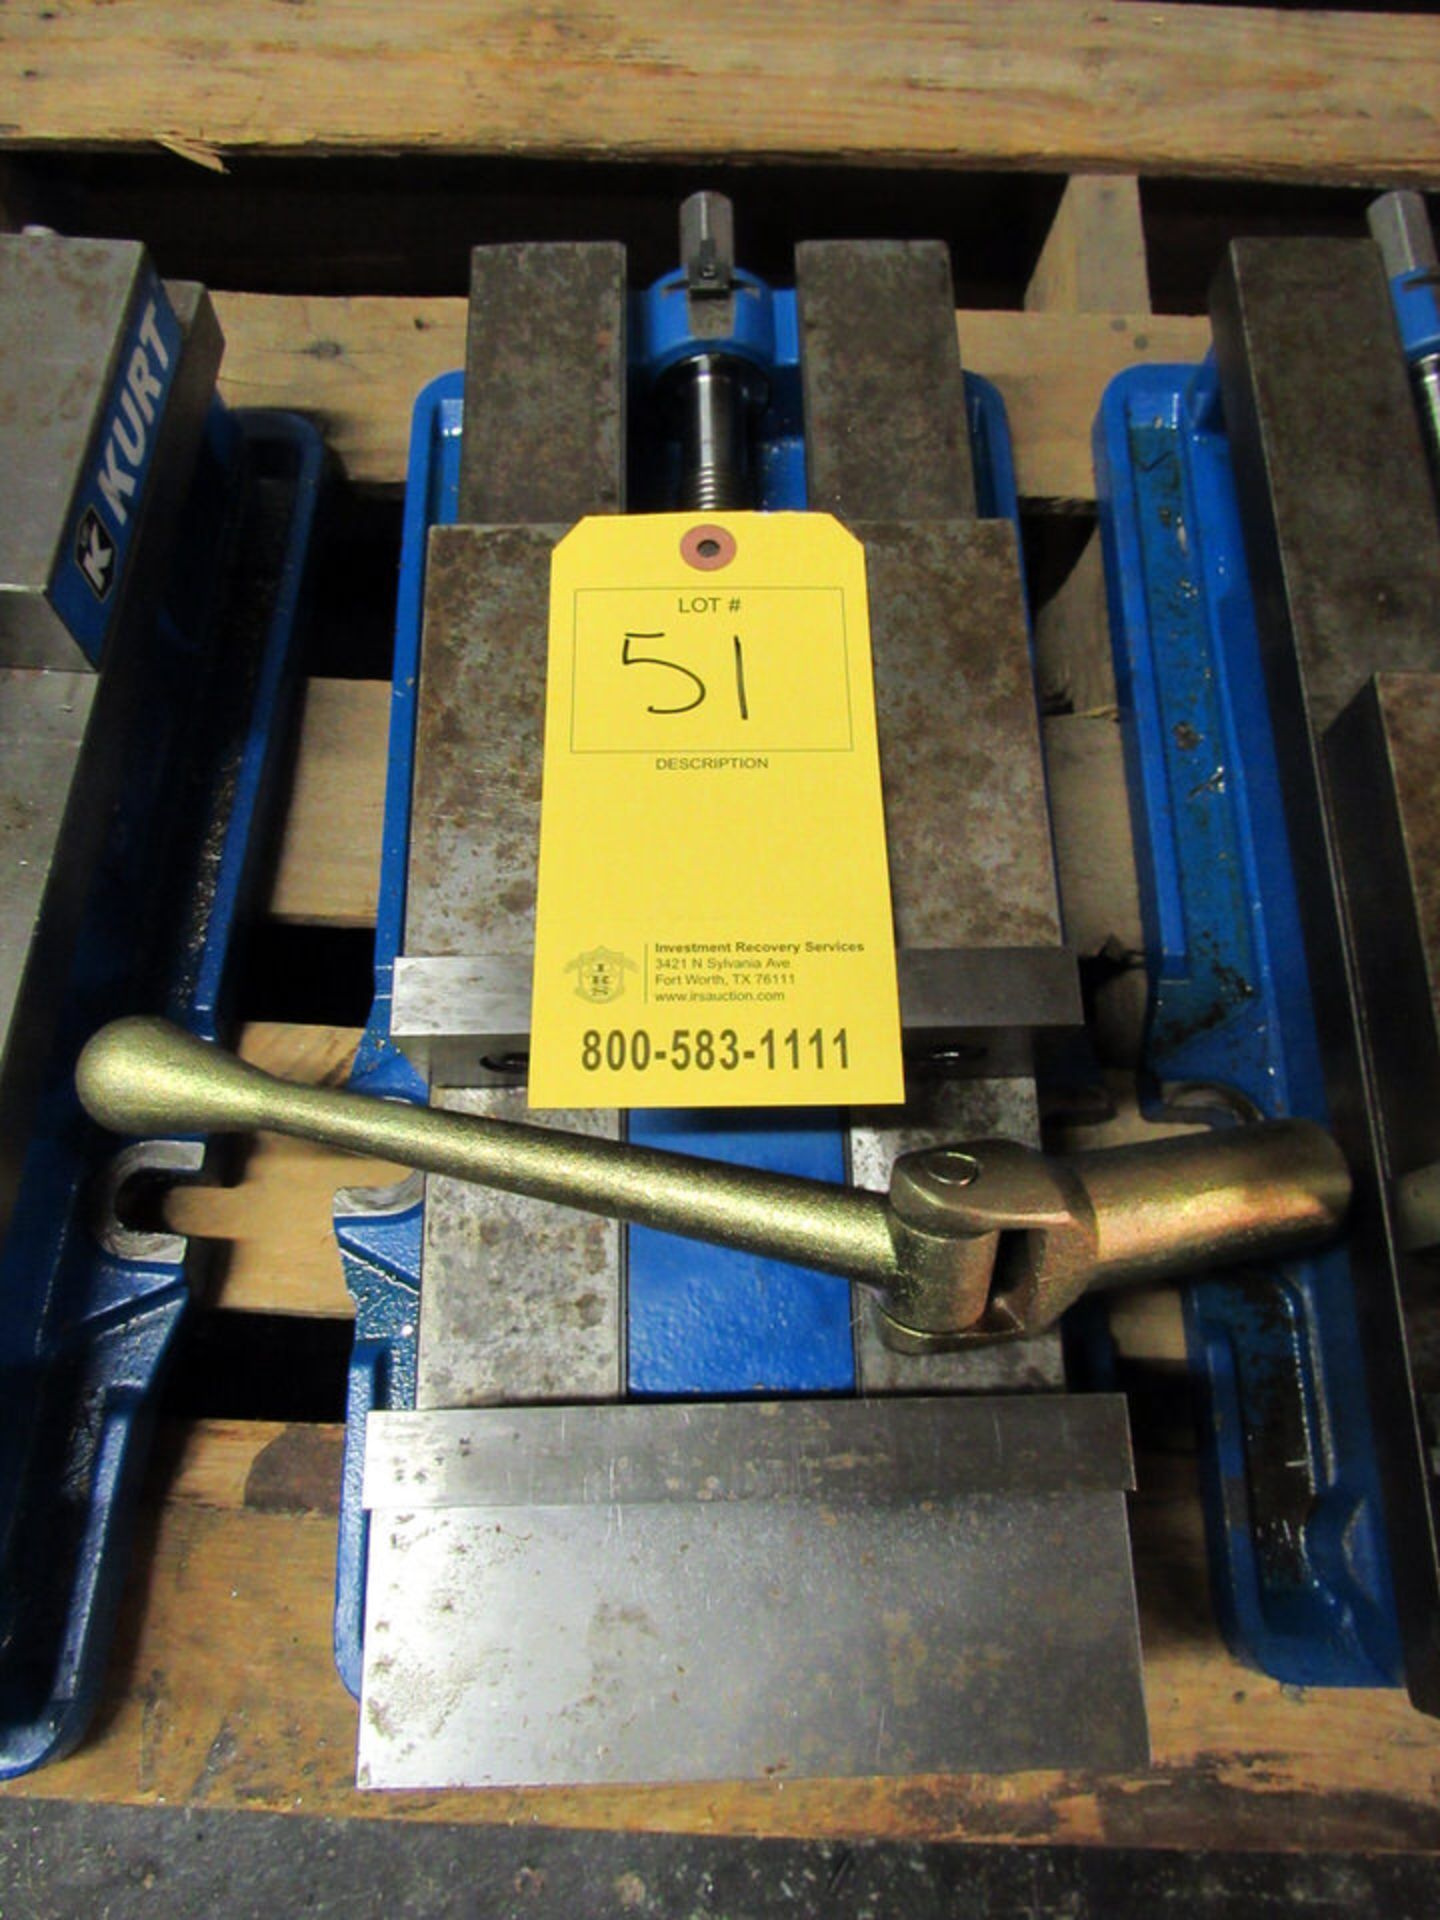 Kurt Model D688 Single Station Machine Vise, 8.8" opening, 6" jaw width, 7342 lbs. clamping force at